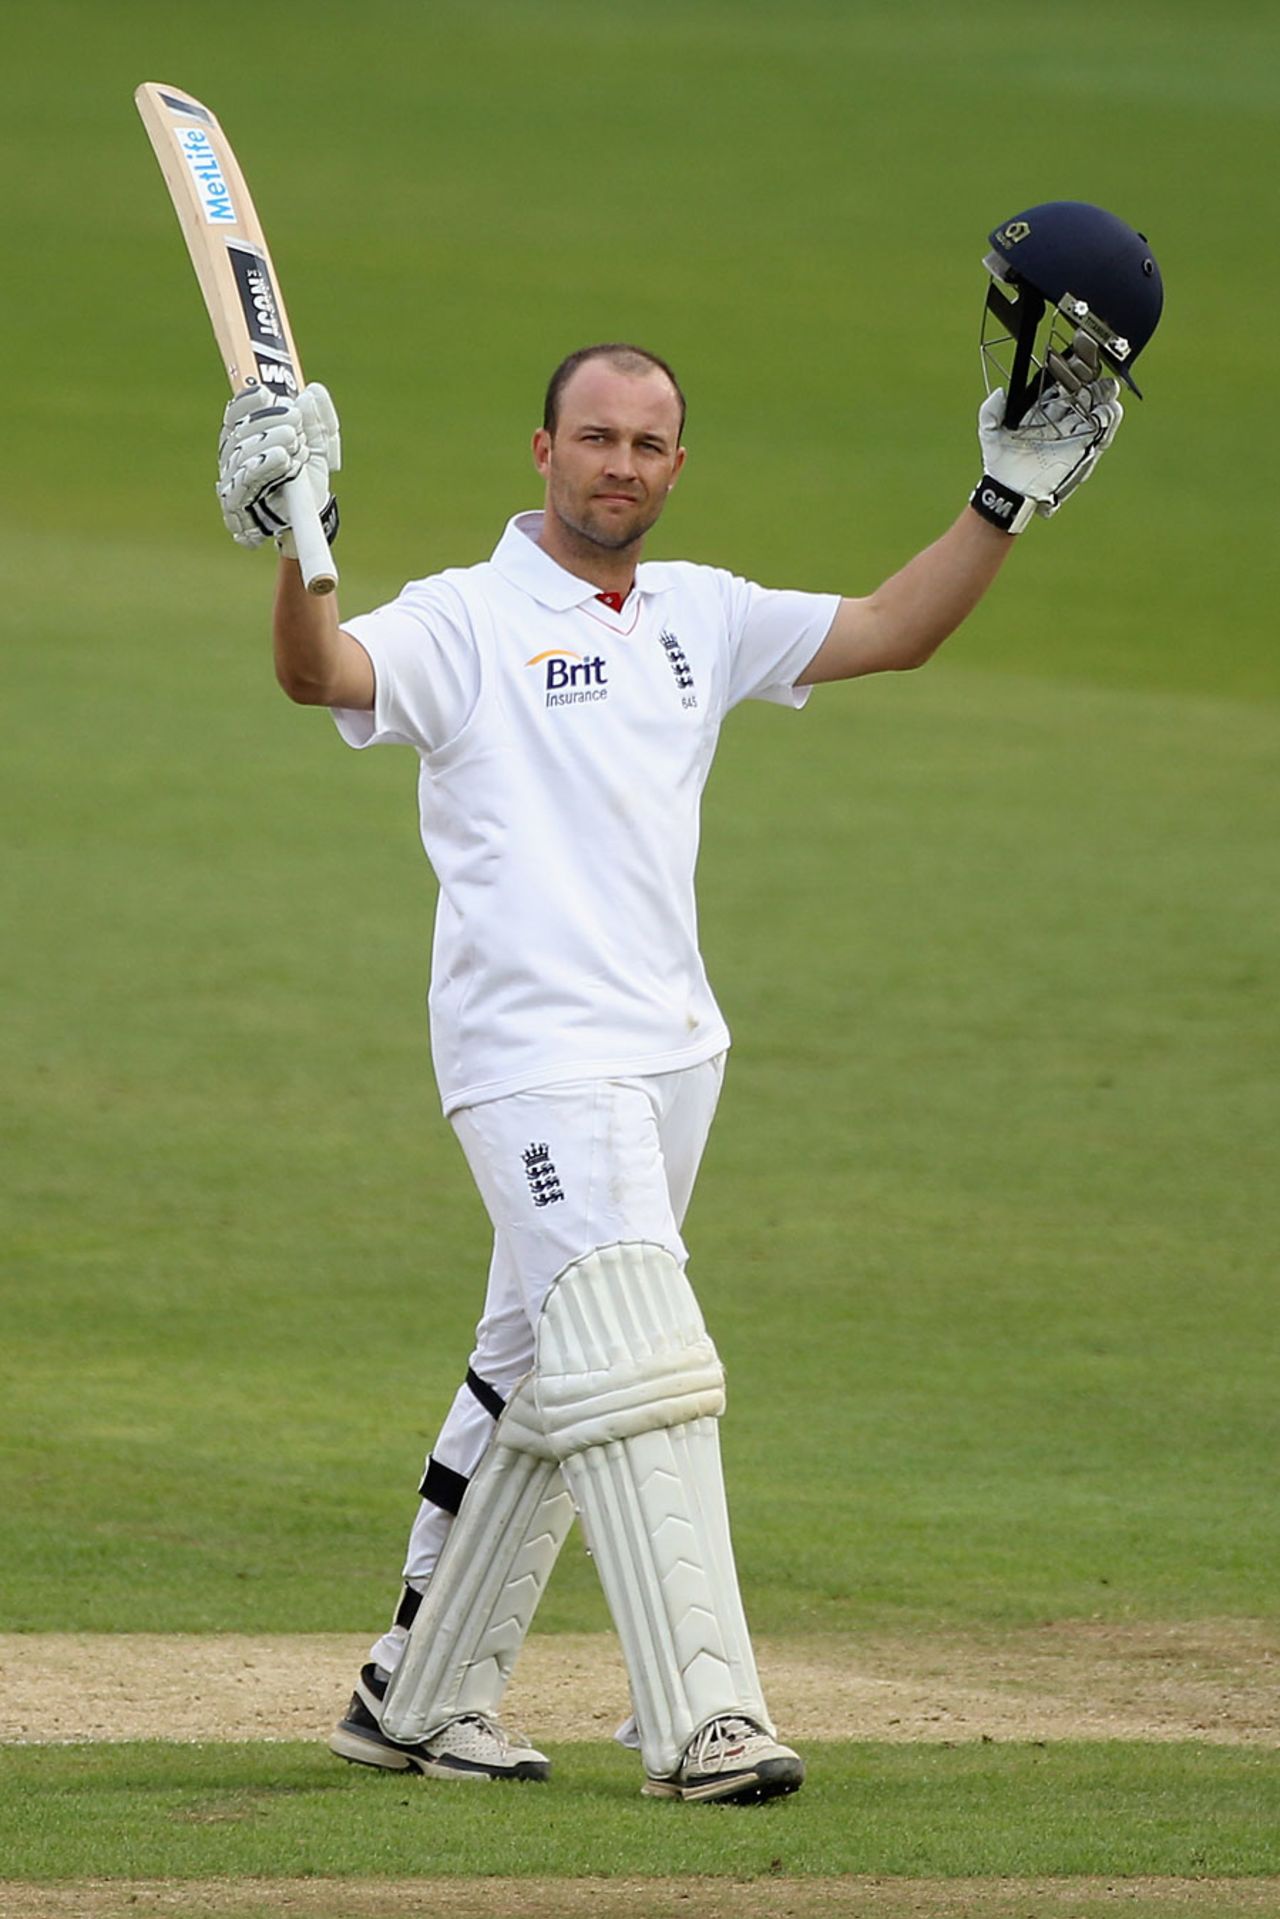 Jonathan Trott made his second Test double hundred, England v Sri Lanka, 1st Test, Cardiff, 4th day, May 29, 2011